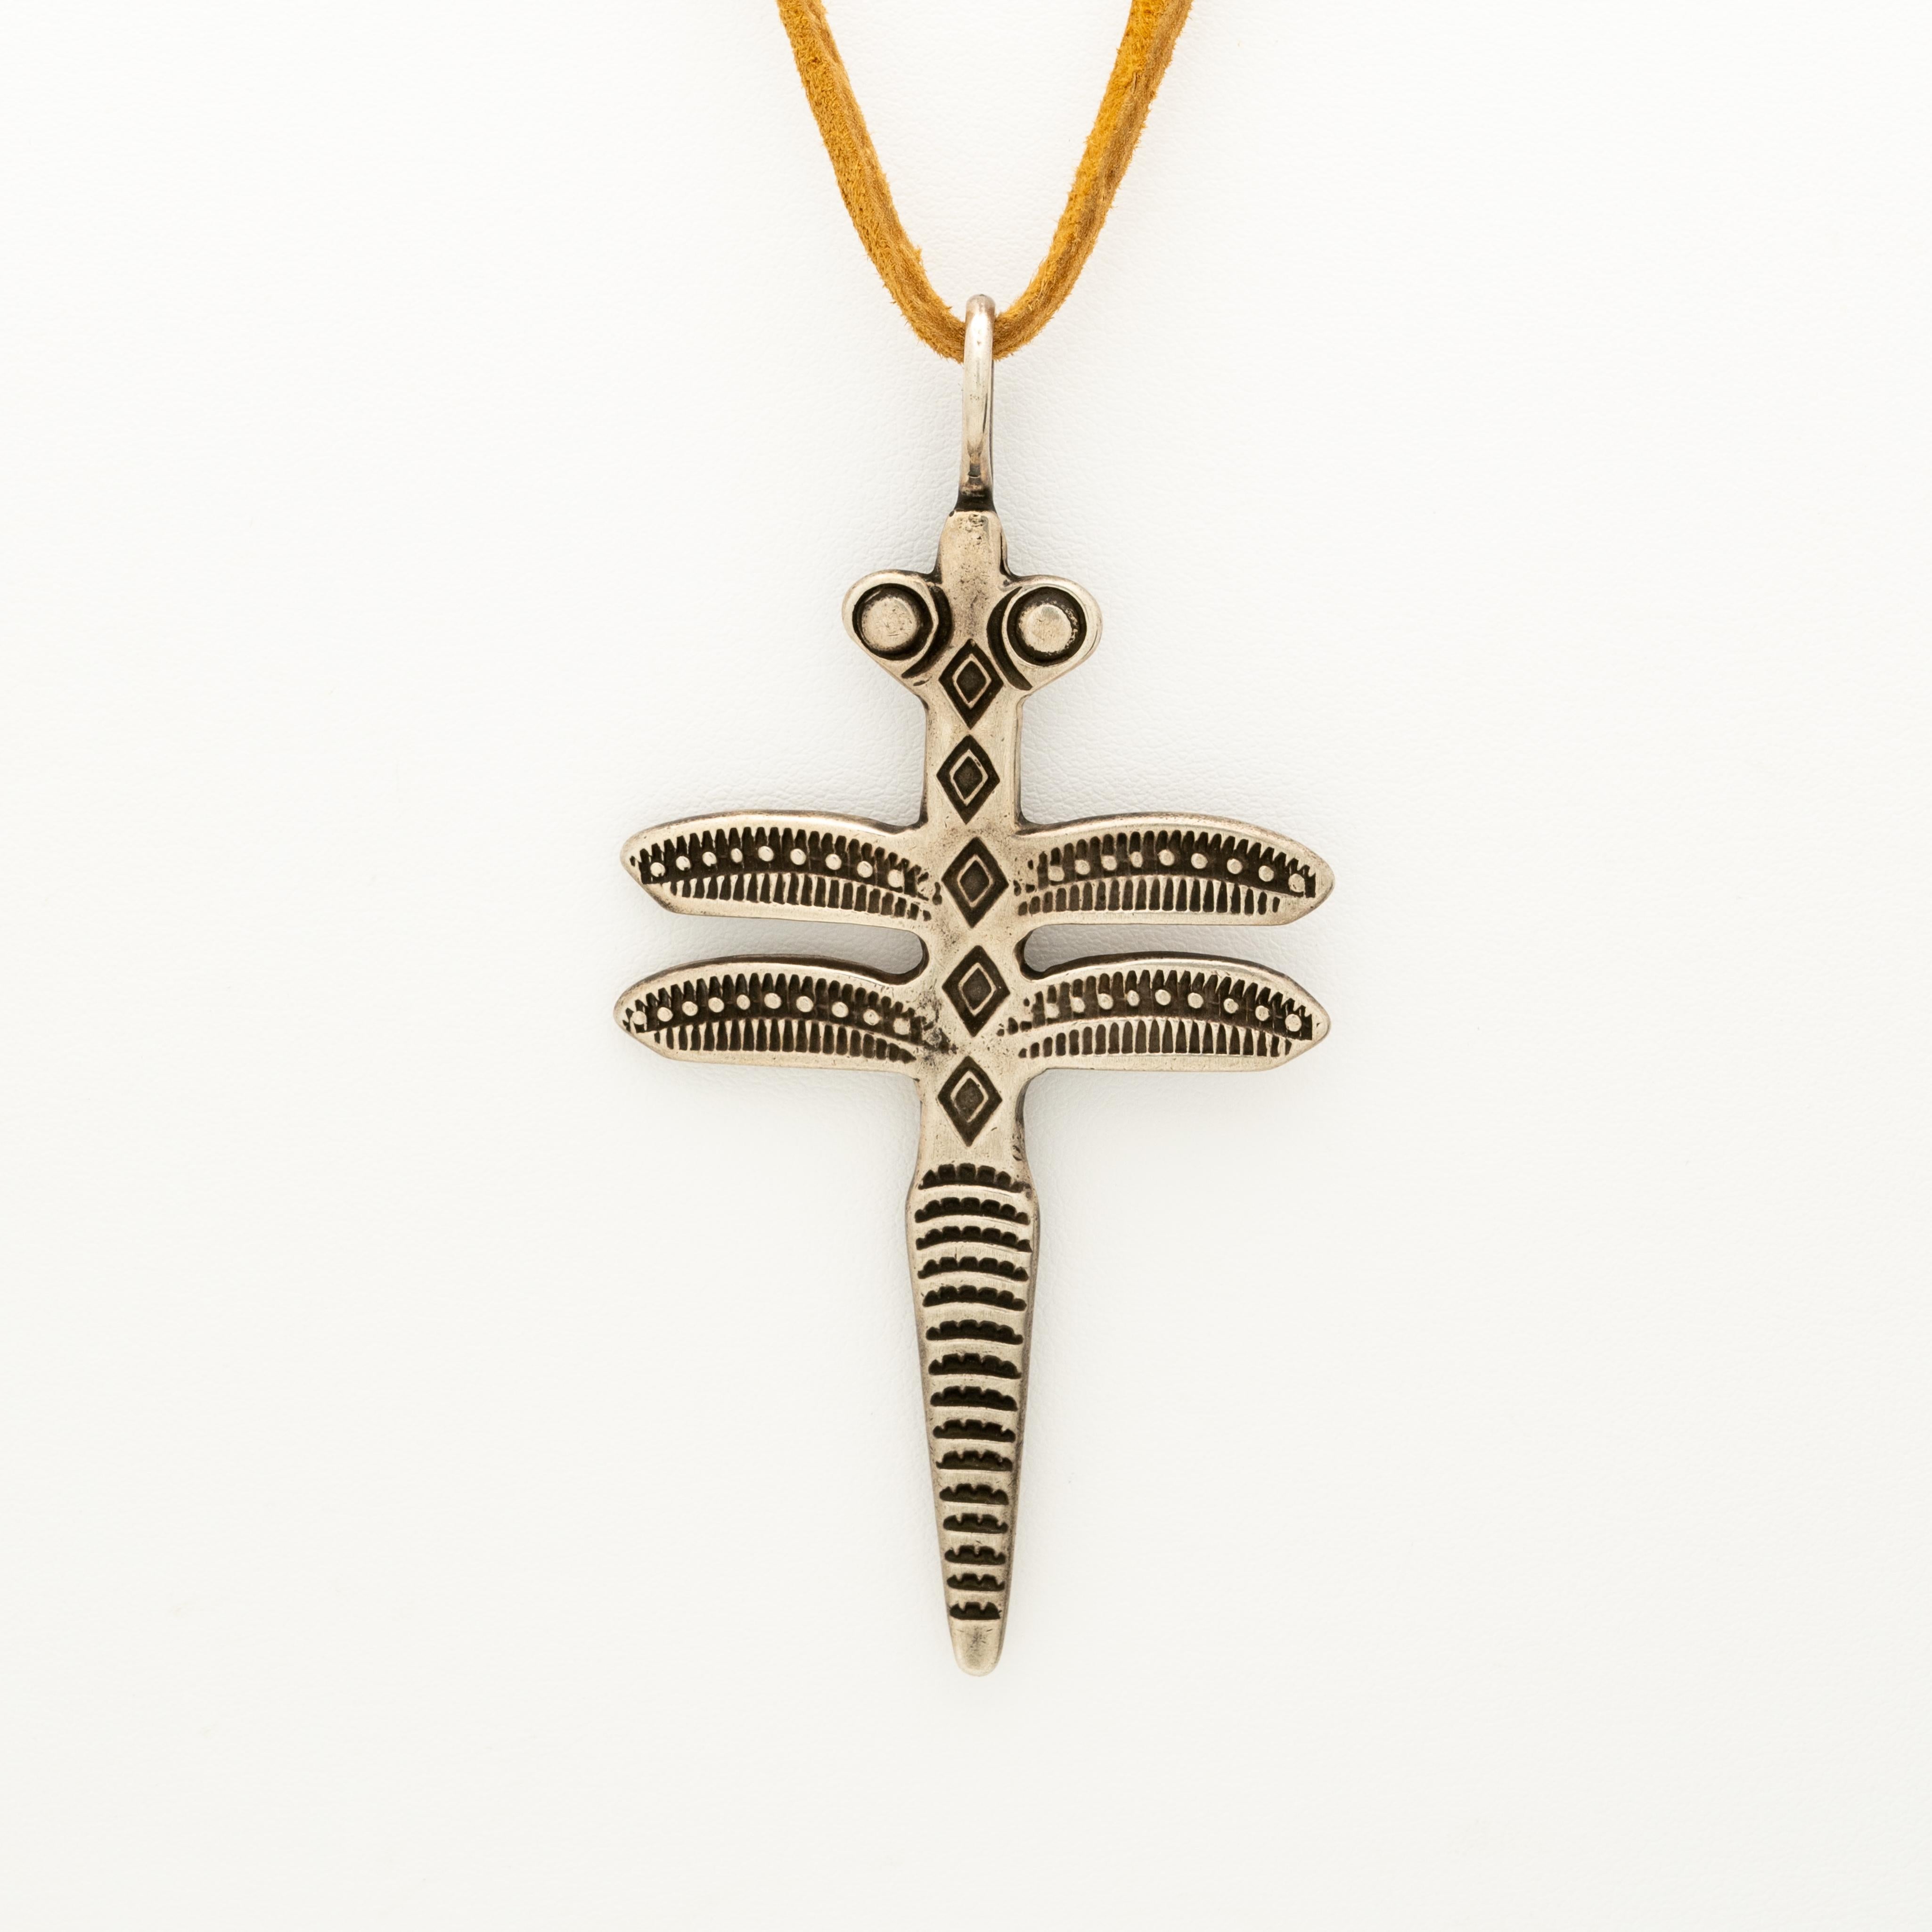 Navajo Silver Dragonfly on natural leather cord

Dragon Fly:
Height: 85mm
Width: 43mm

Leather:
Length: 52cm adjustable

Overall Weight: 19.15 grams heavy and solid